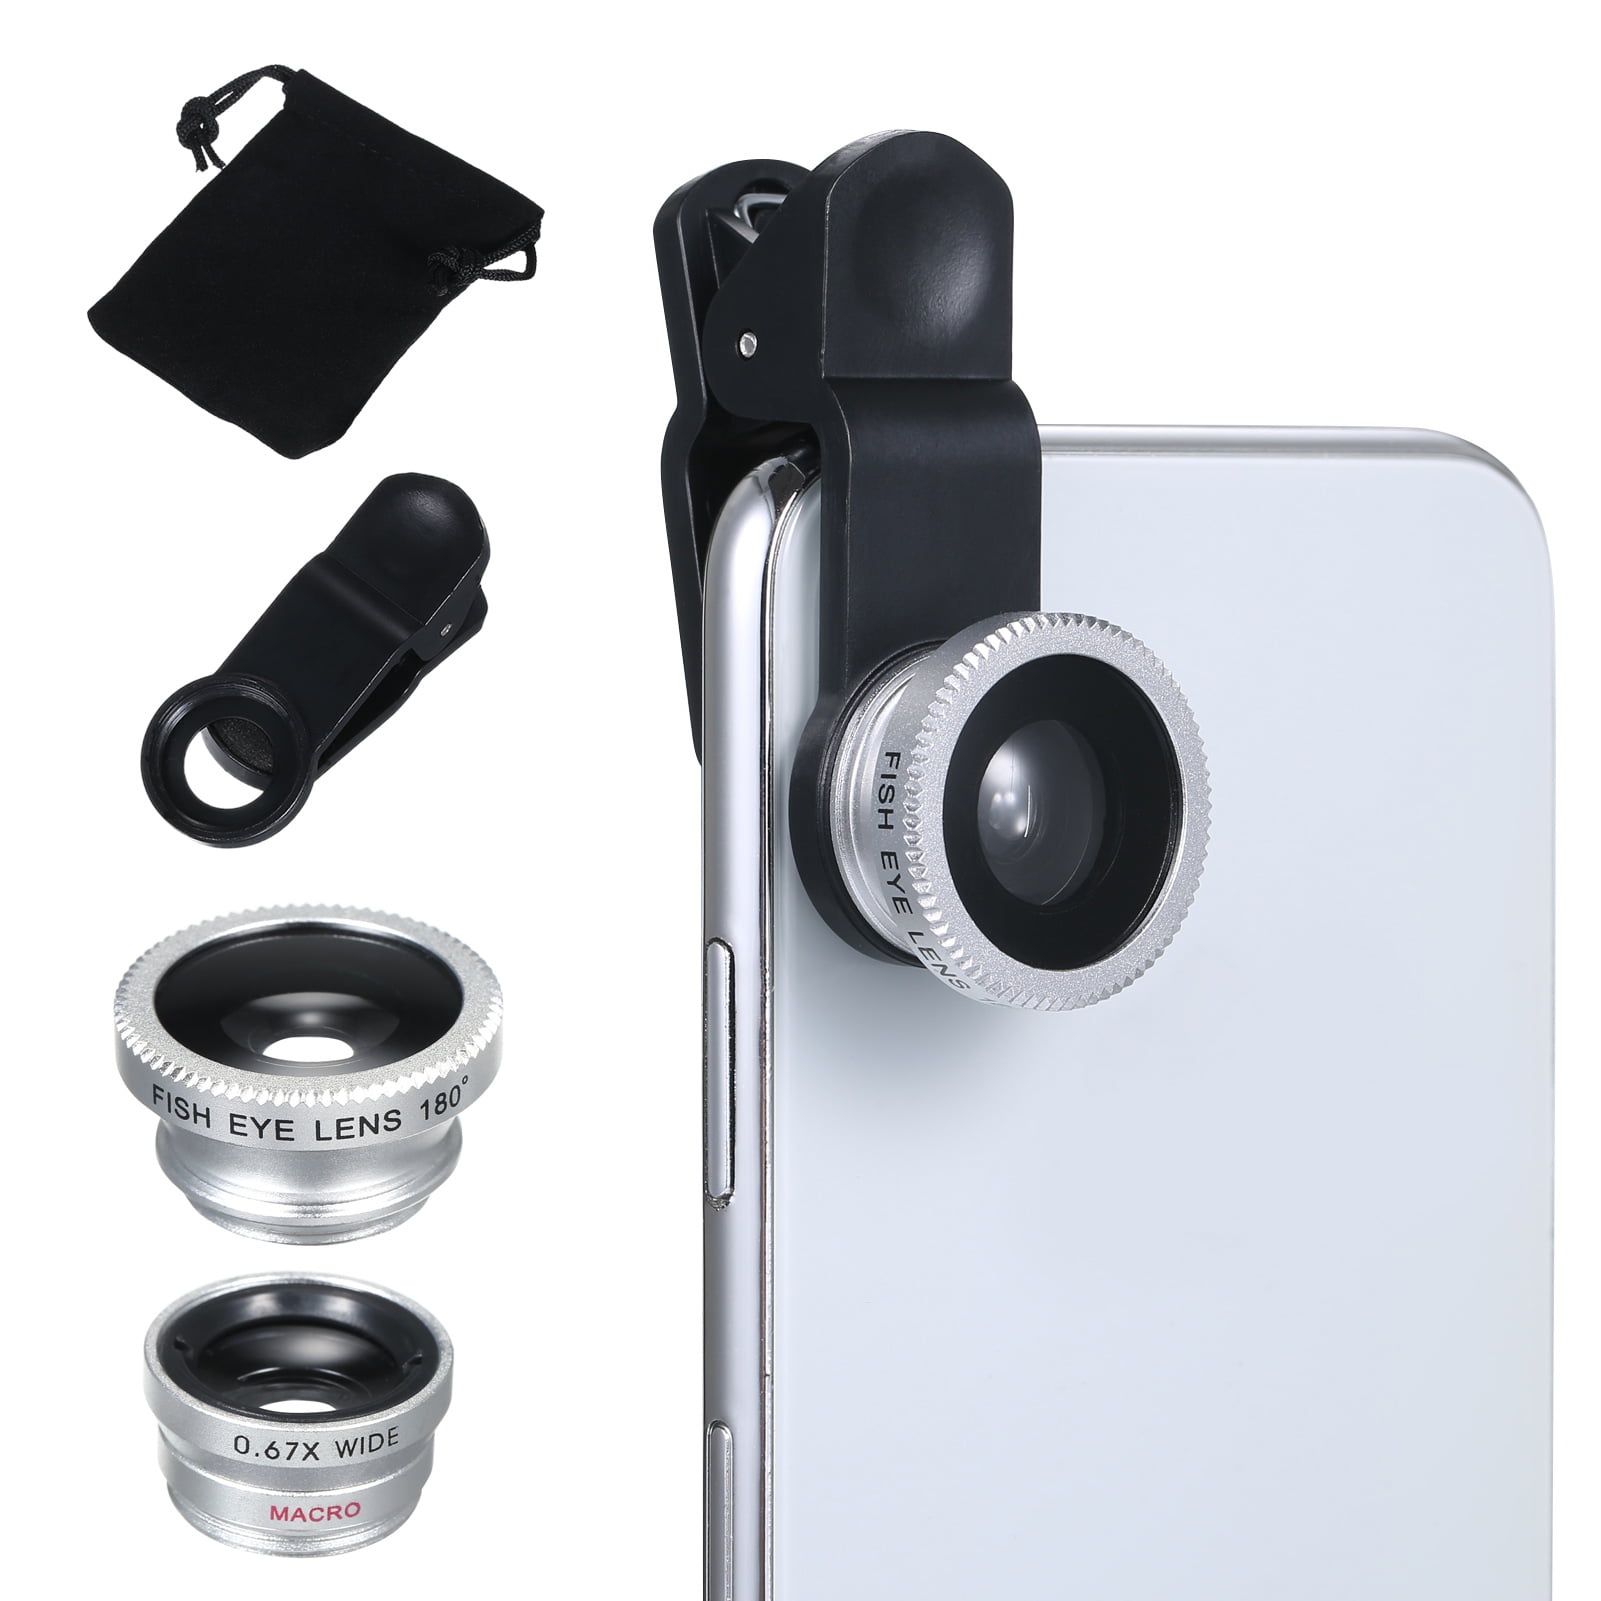 Htovila Mobile Phone 3 in 1 Camera Lens Kit Clip-on Phone Lens Kit 180° Fisheye Lens & 0.67X Wide Angle Lens & Macro Lens with Clip Pouch Compatible with iOS Android Phones